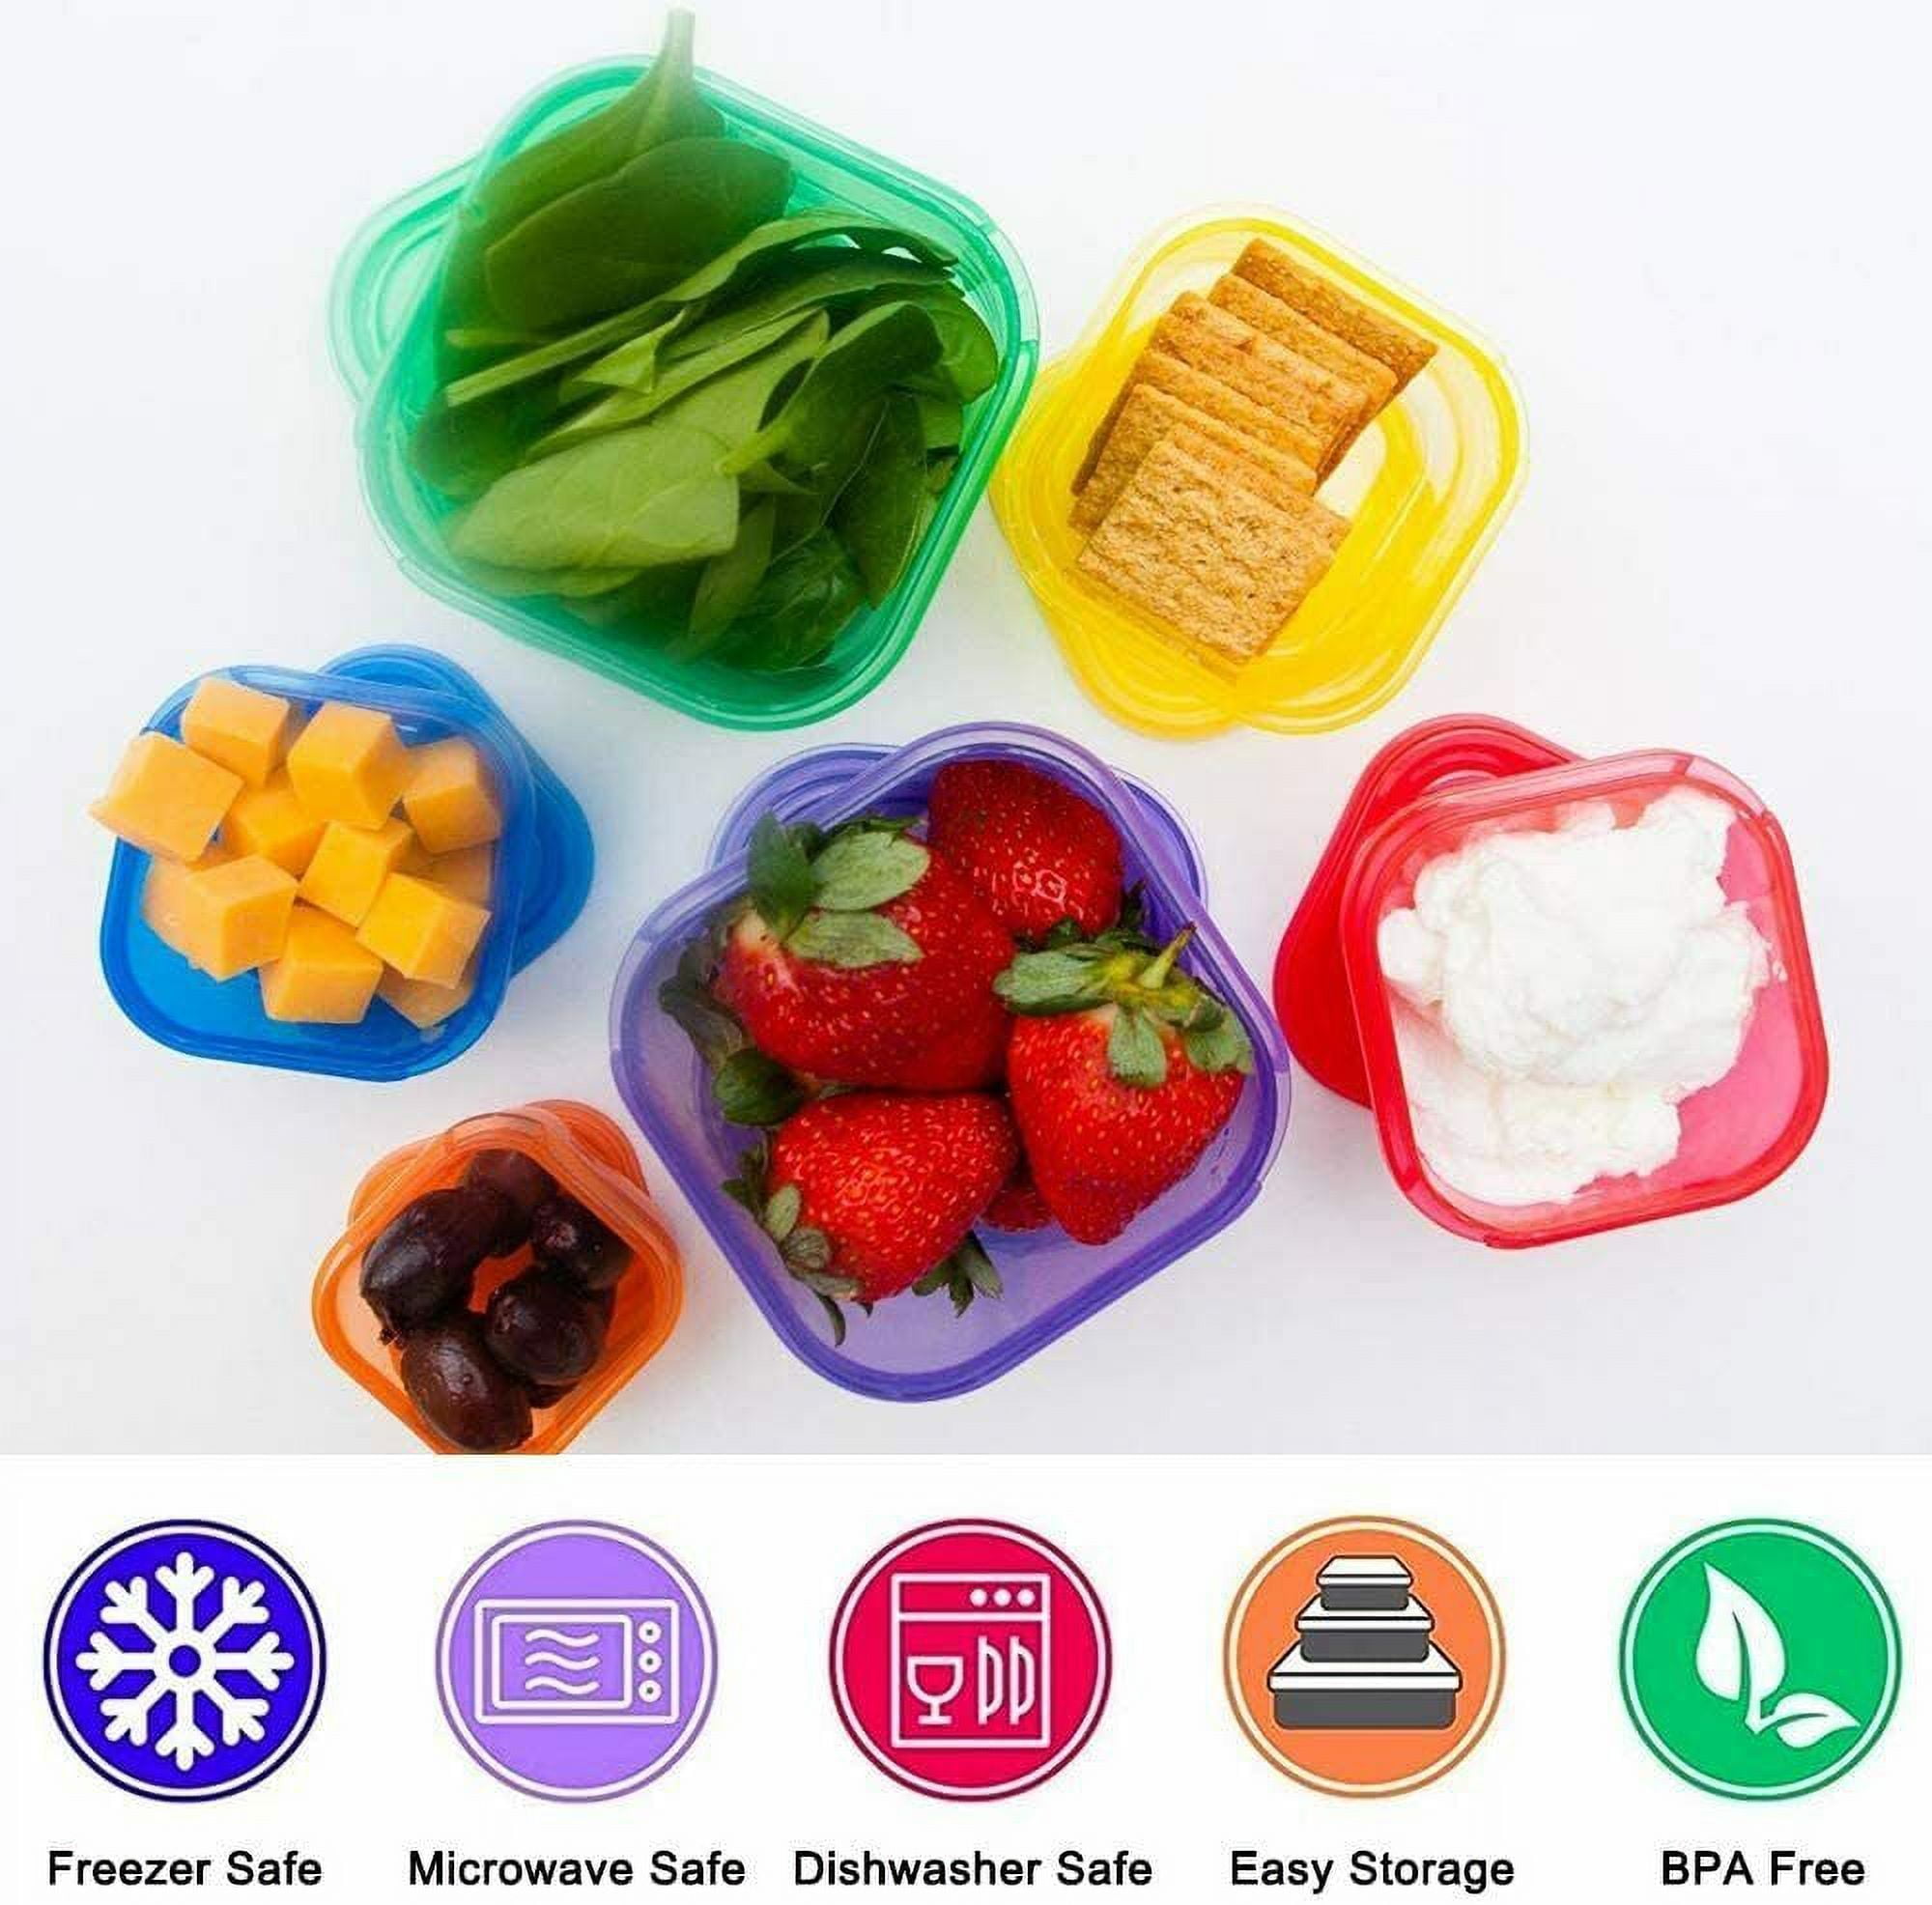  Efficient Nutrition Portion Control Containers DELUXE Kit  (14-Piece) with COMPLETE GUIDE + 21 DAY PLANNER + RECIPE eBOOK BPA FREE  Color Coded Meal Prep System for Diet and Weight Loss: Home